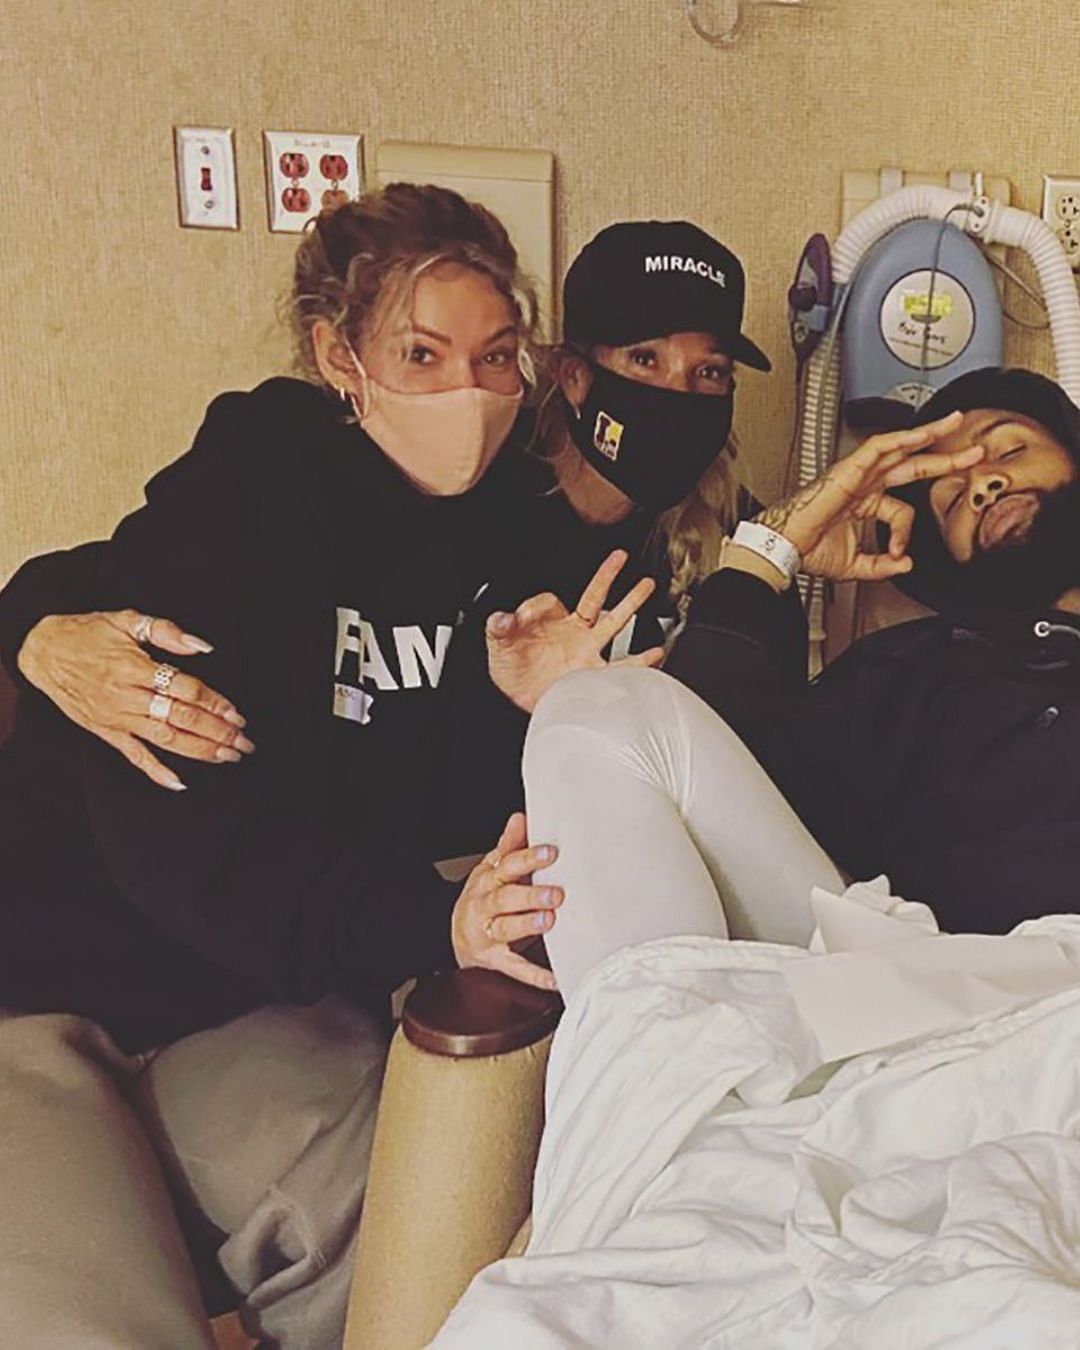 Wood and a friend with Beckham Jr. after his surgery. Credit: Heather Van Norman (IG)